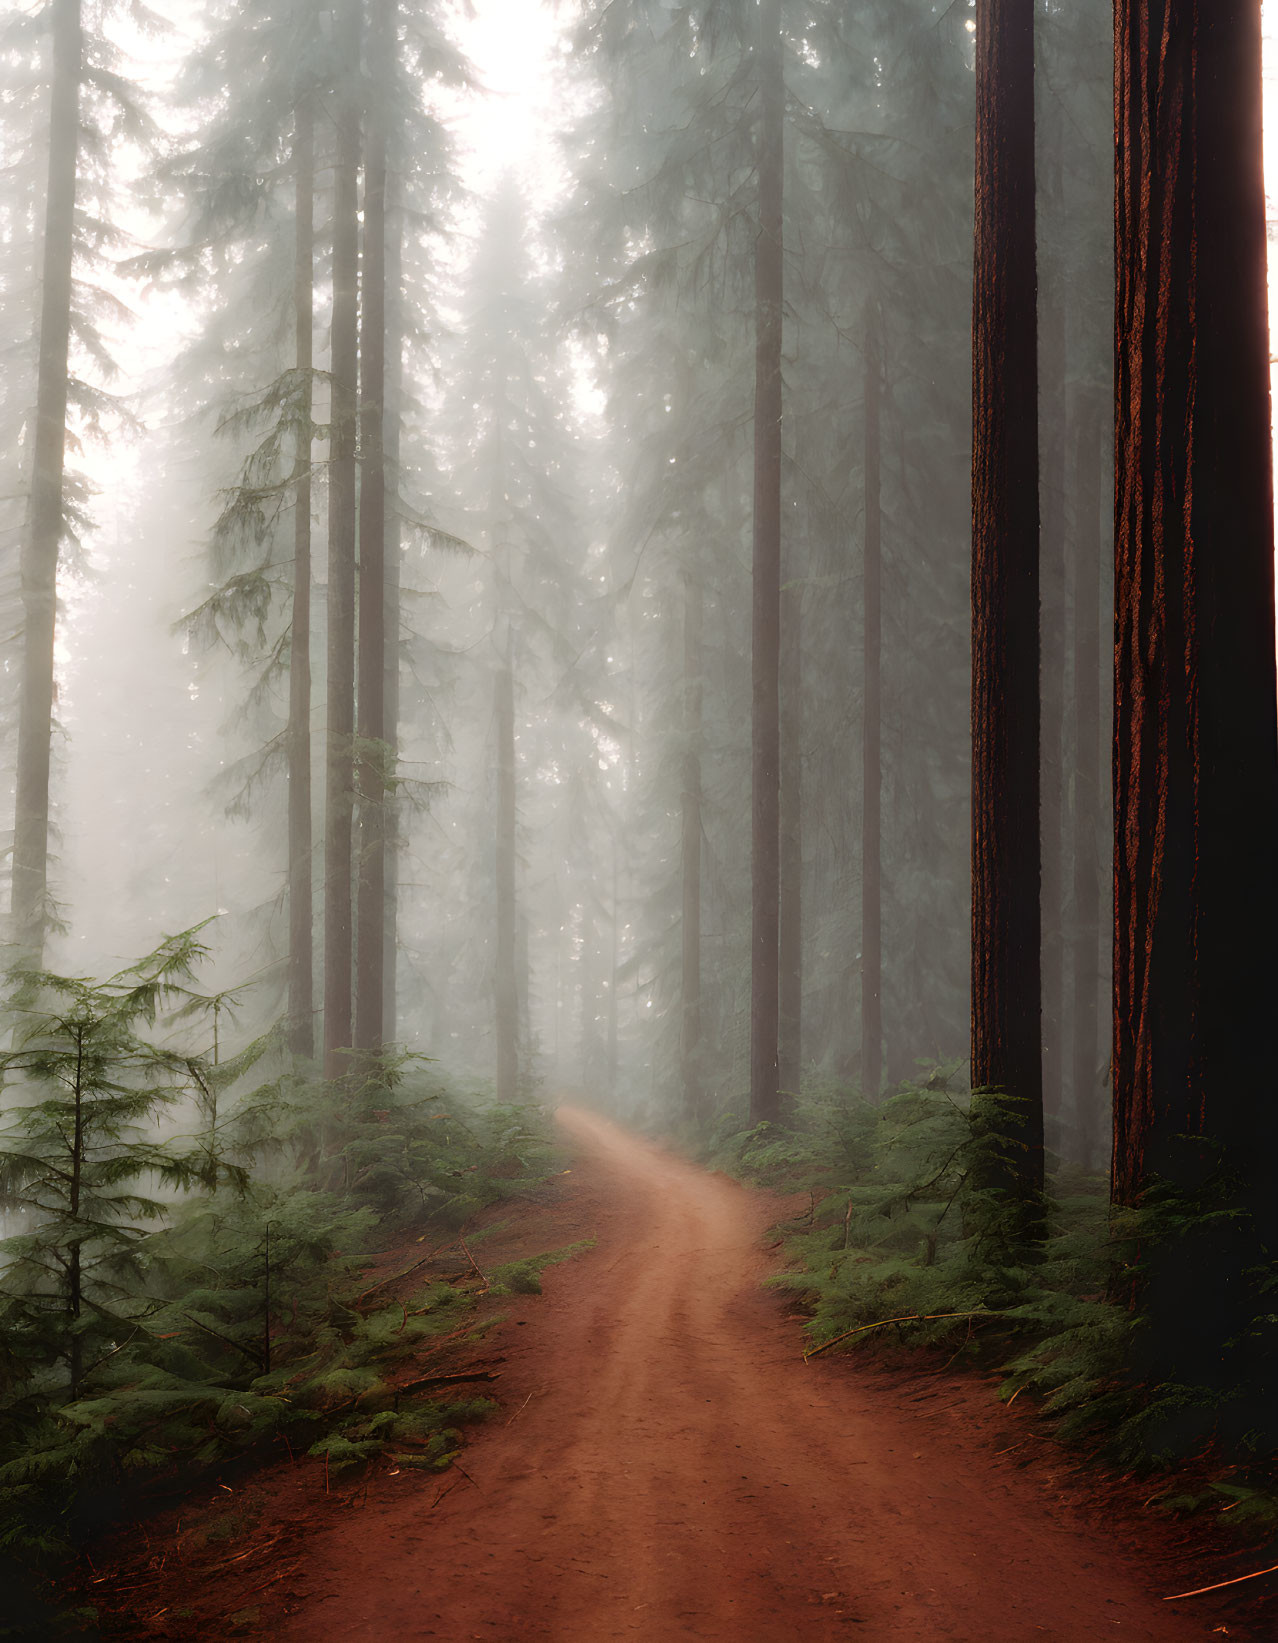 Tranquil forest path with misty towering trees